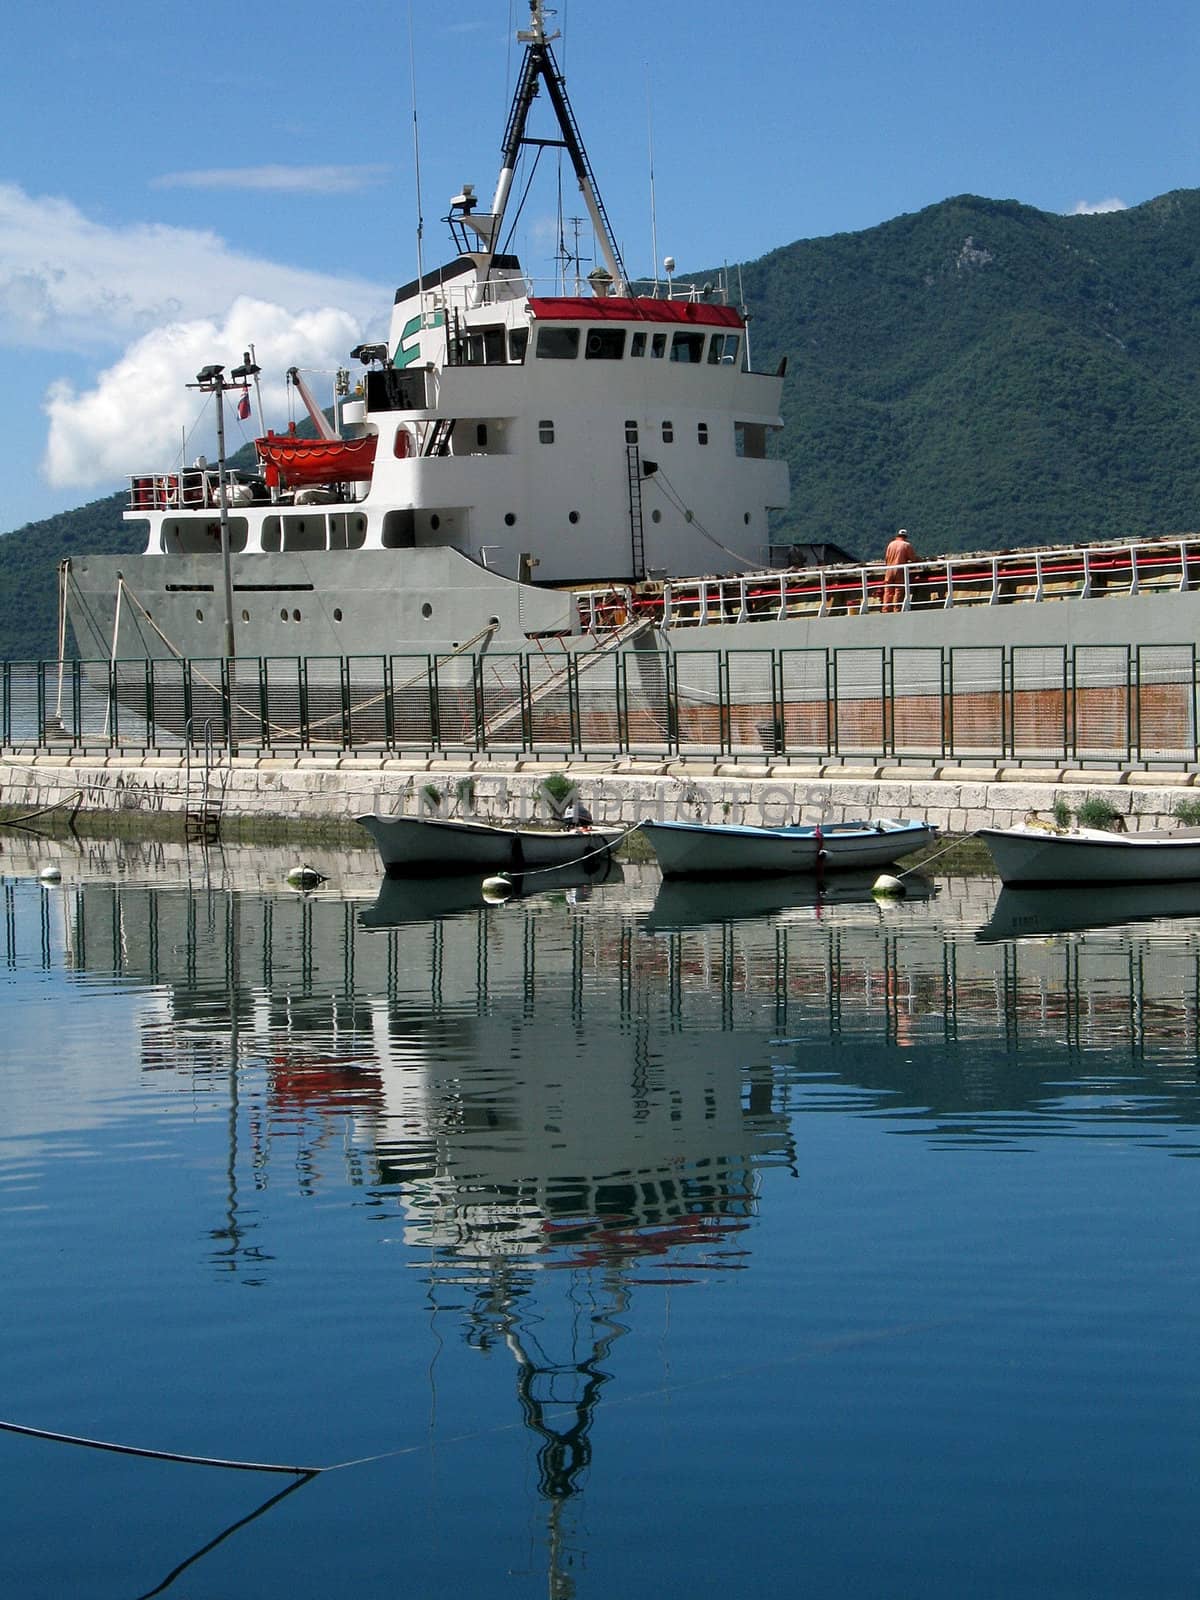 Cargo ship with reflection